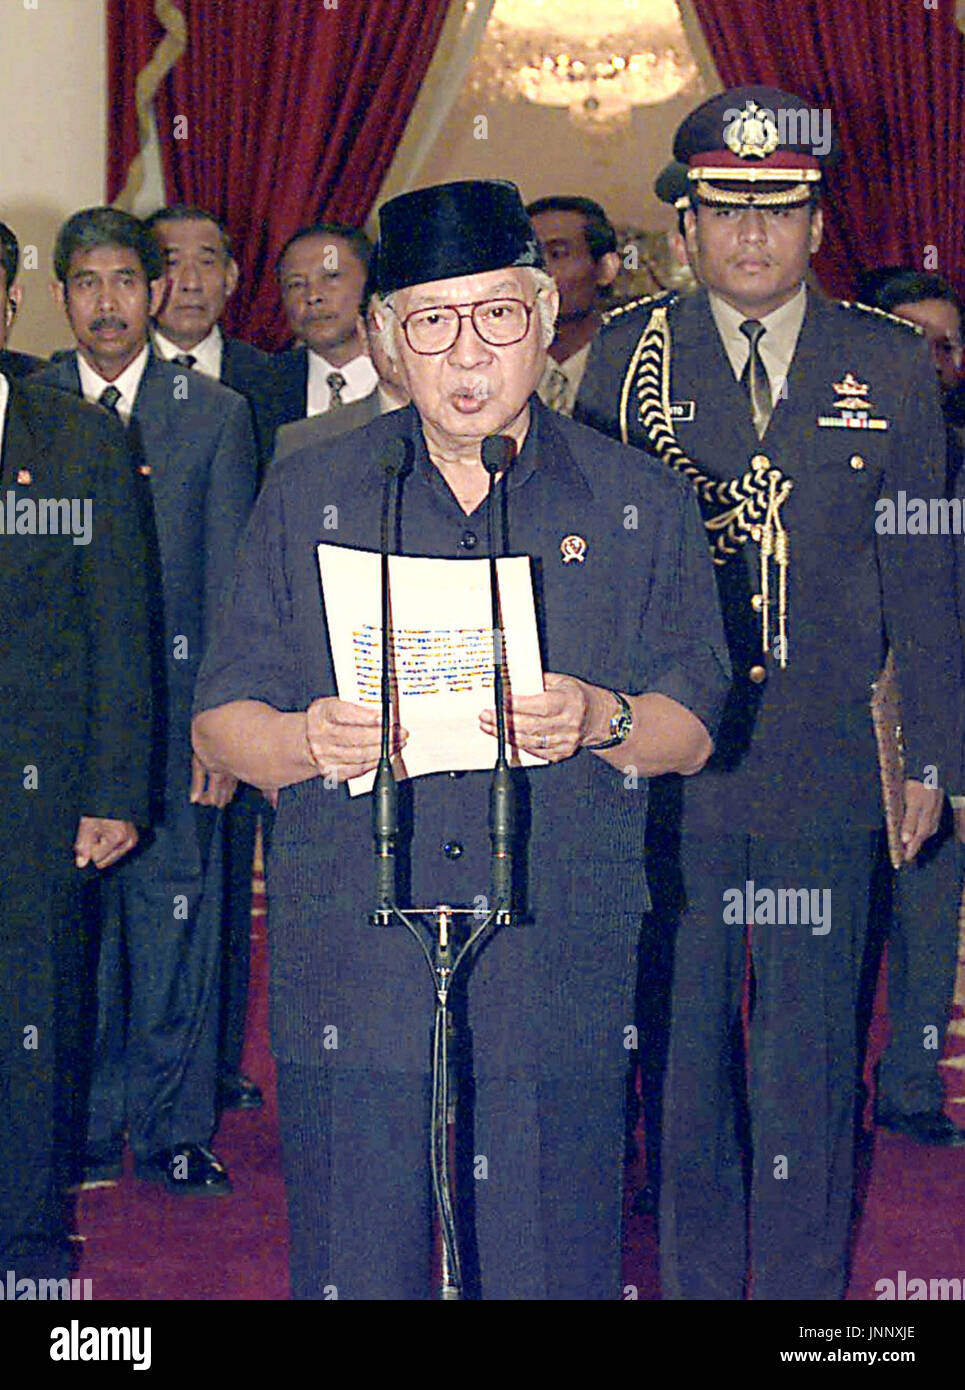 JAKARTA, Indonesia - Indonesian President Suharto expresses his intention to resign at the Merdeka Palace in Jakarta in a photo taken in May 1998. Suharto, who shaped and ruled the country for 32 years through ruthless but quiet authoritarianism, died on Jan. 27 at age 86. (Kyodo) Stock Photo